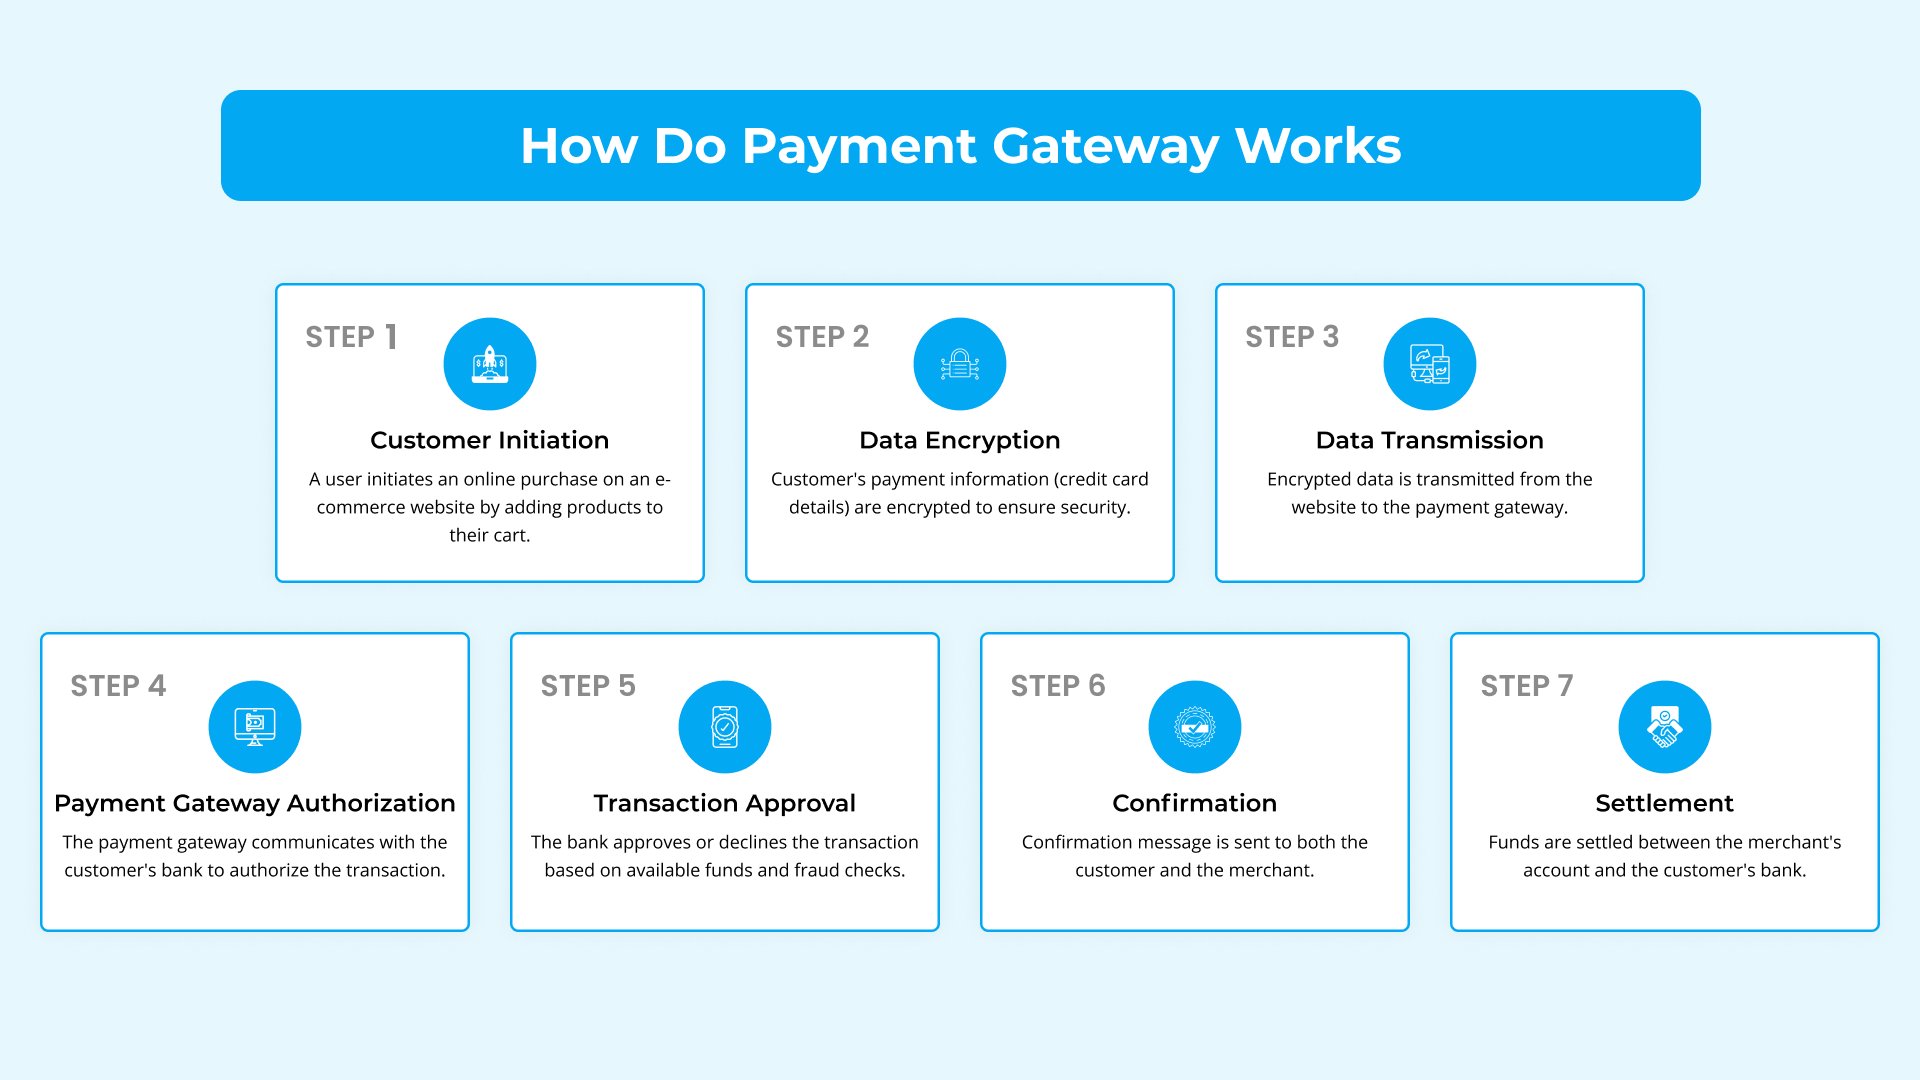 How Do Payment Gateway Works